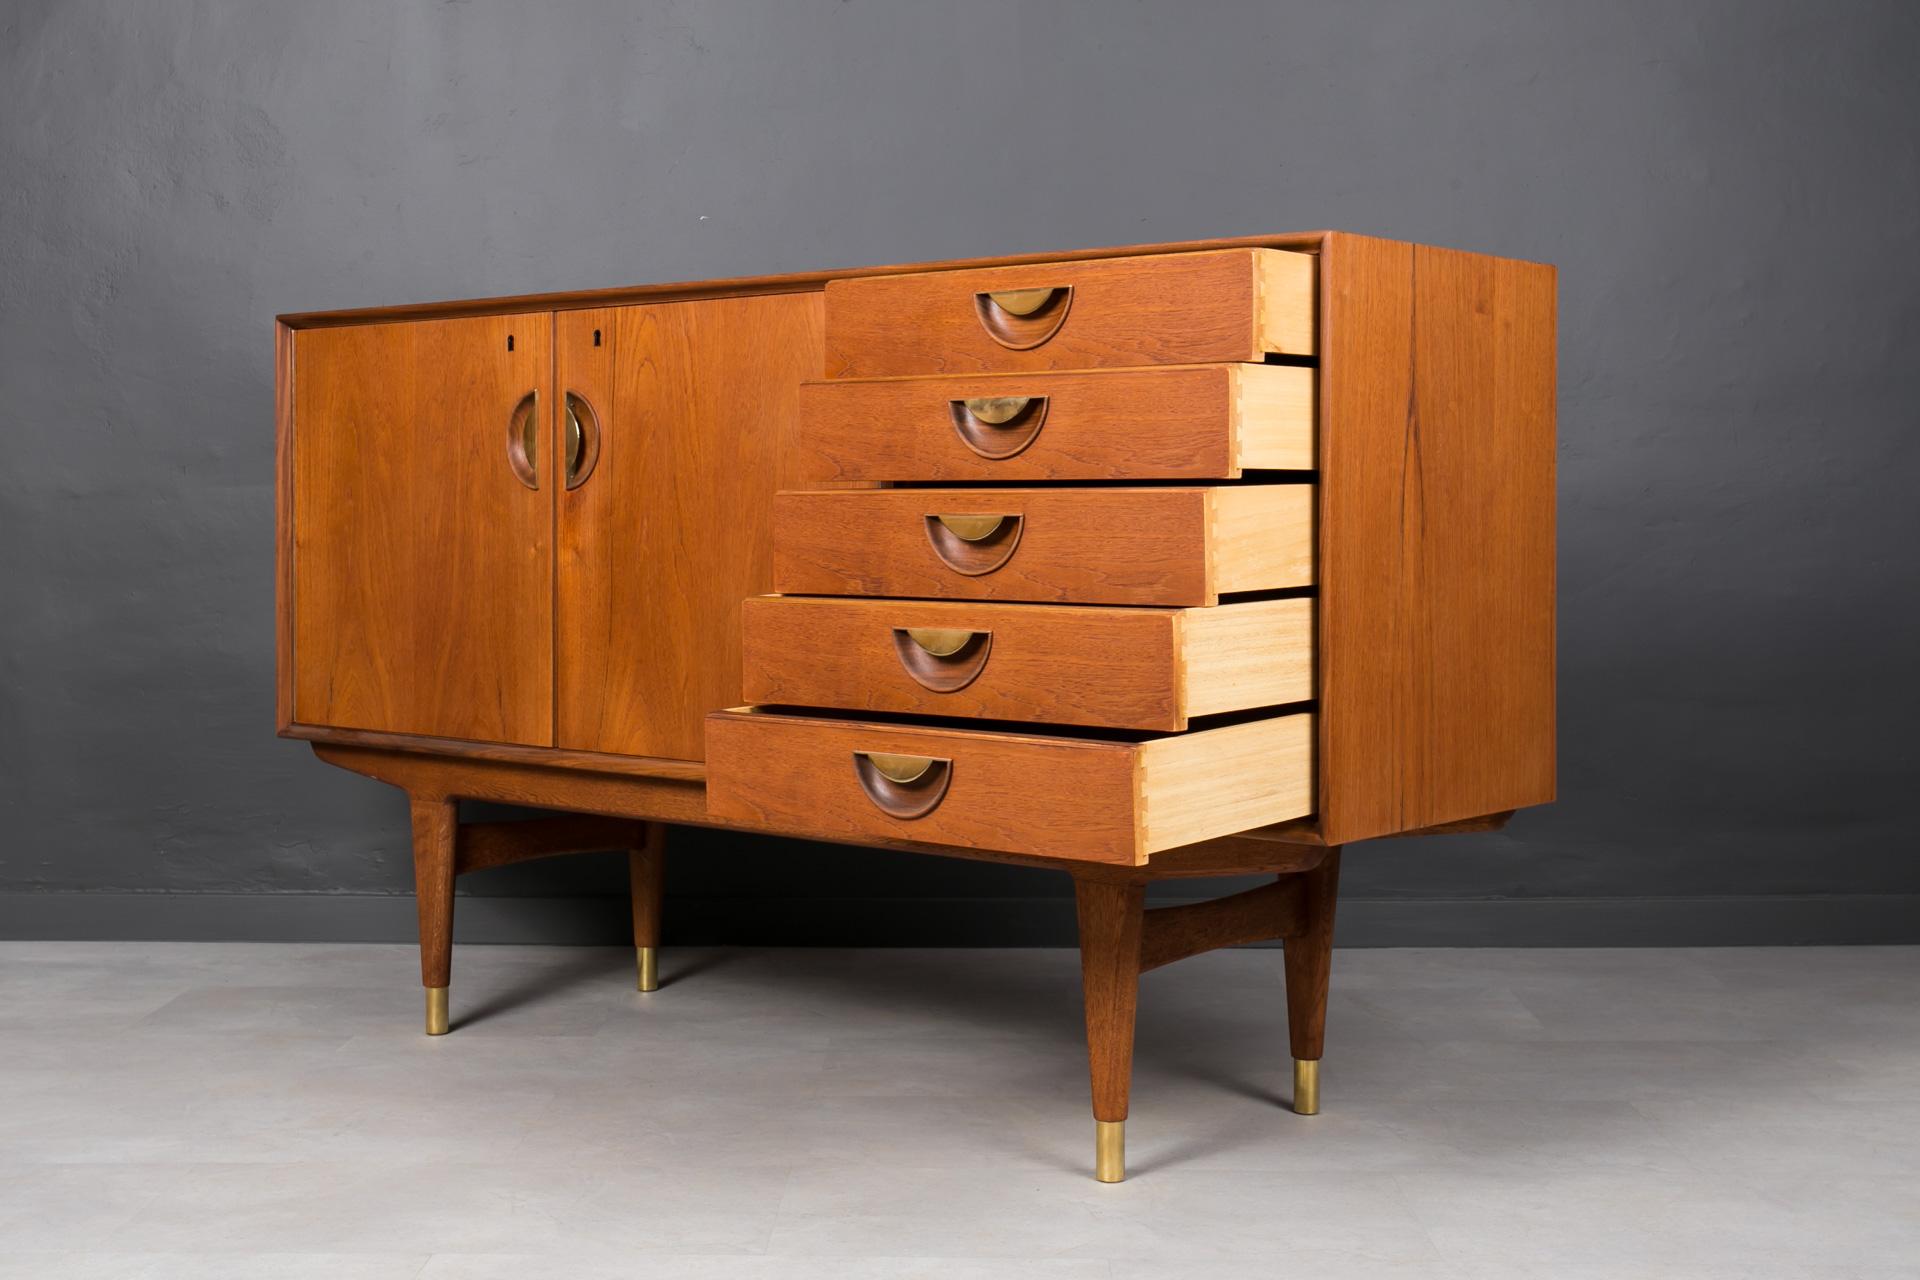 Oiled Midcentury Danish Sideboard, Teak Wood and Brass Details, 1950s For Sale